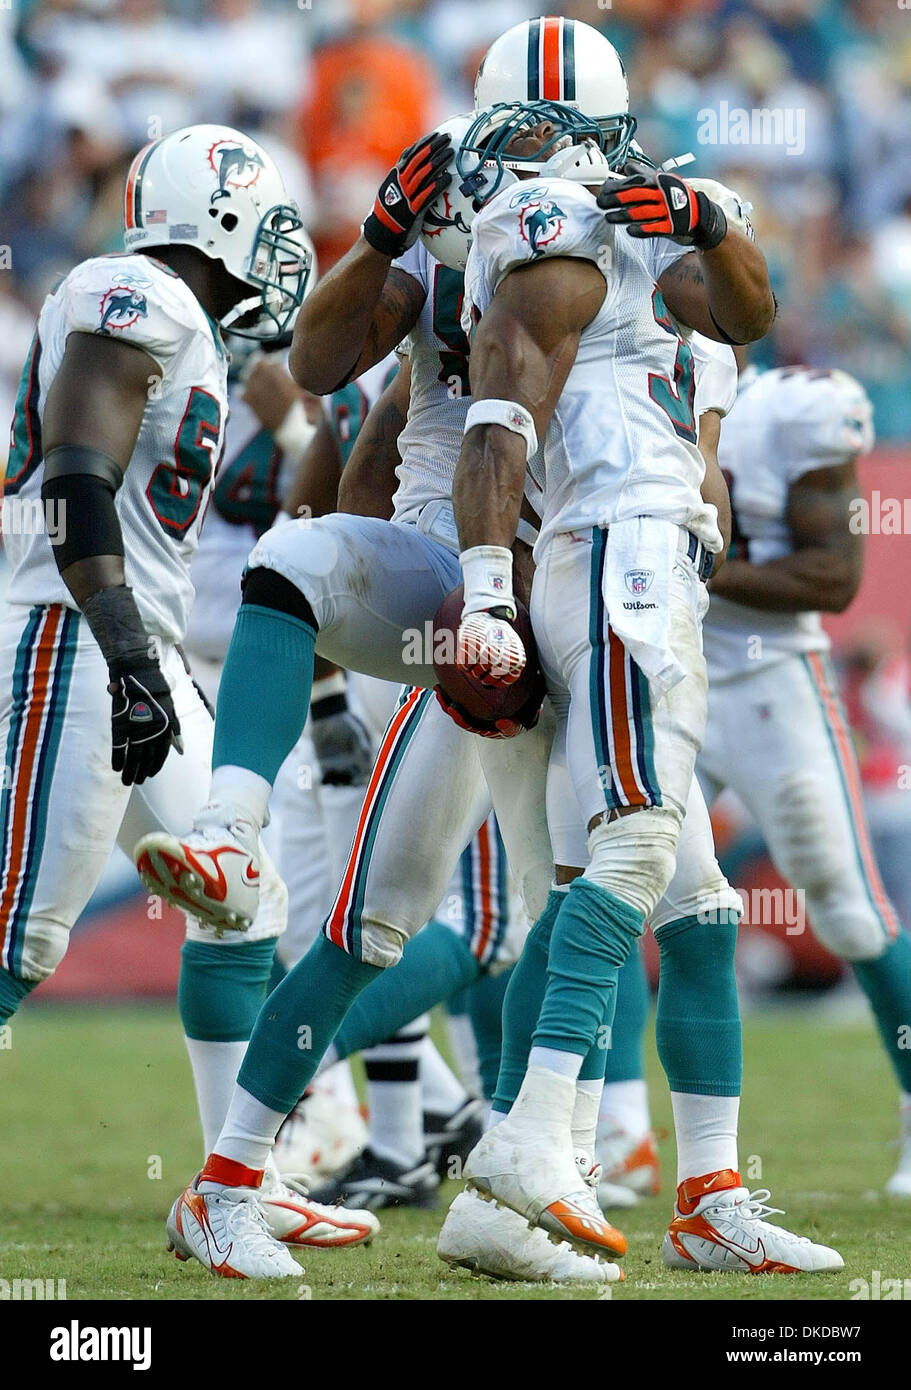 Dec 10, 2006; Miami Gardens, FL, USA; Miami Dolphins safety Yeremiah Bell  celebrates with teammate Channing Crowder after recovering a fumble, during  first half action Sunday afternoon at Dolphin stadium. Dolphins 21-0